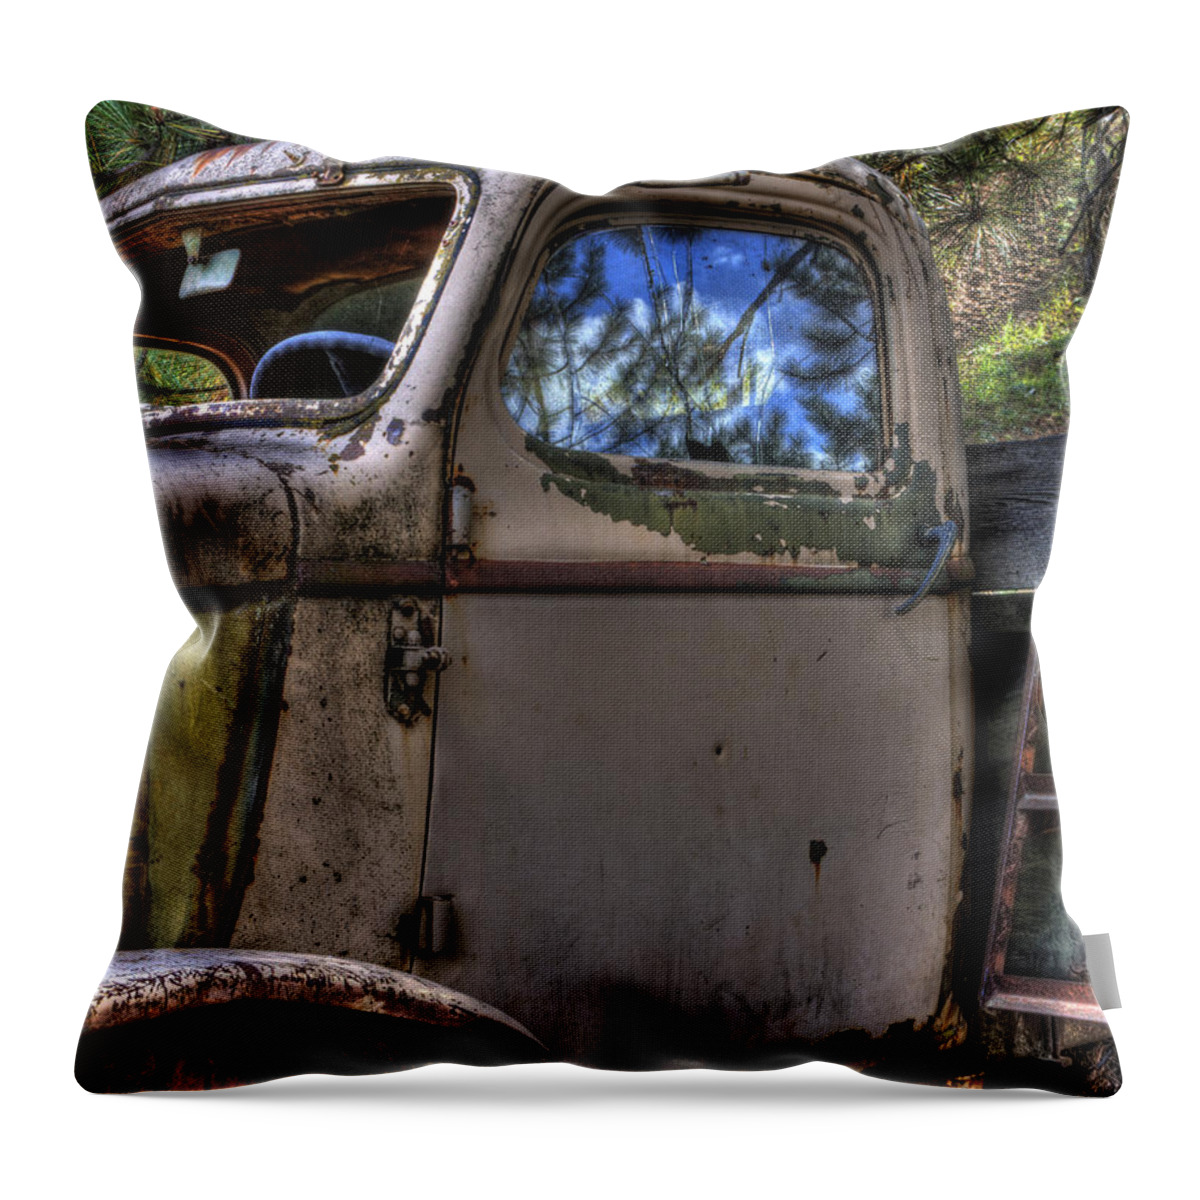  Throw Pillow featuring the photograph Wrecking Yard Study 4 by Lee Santa